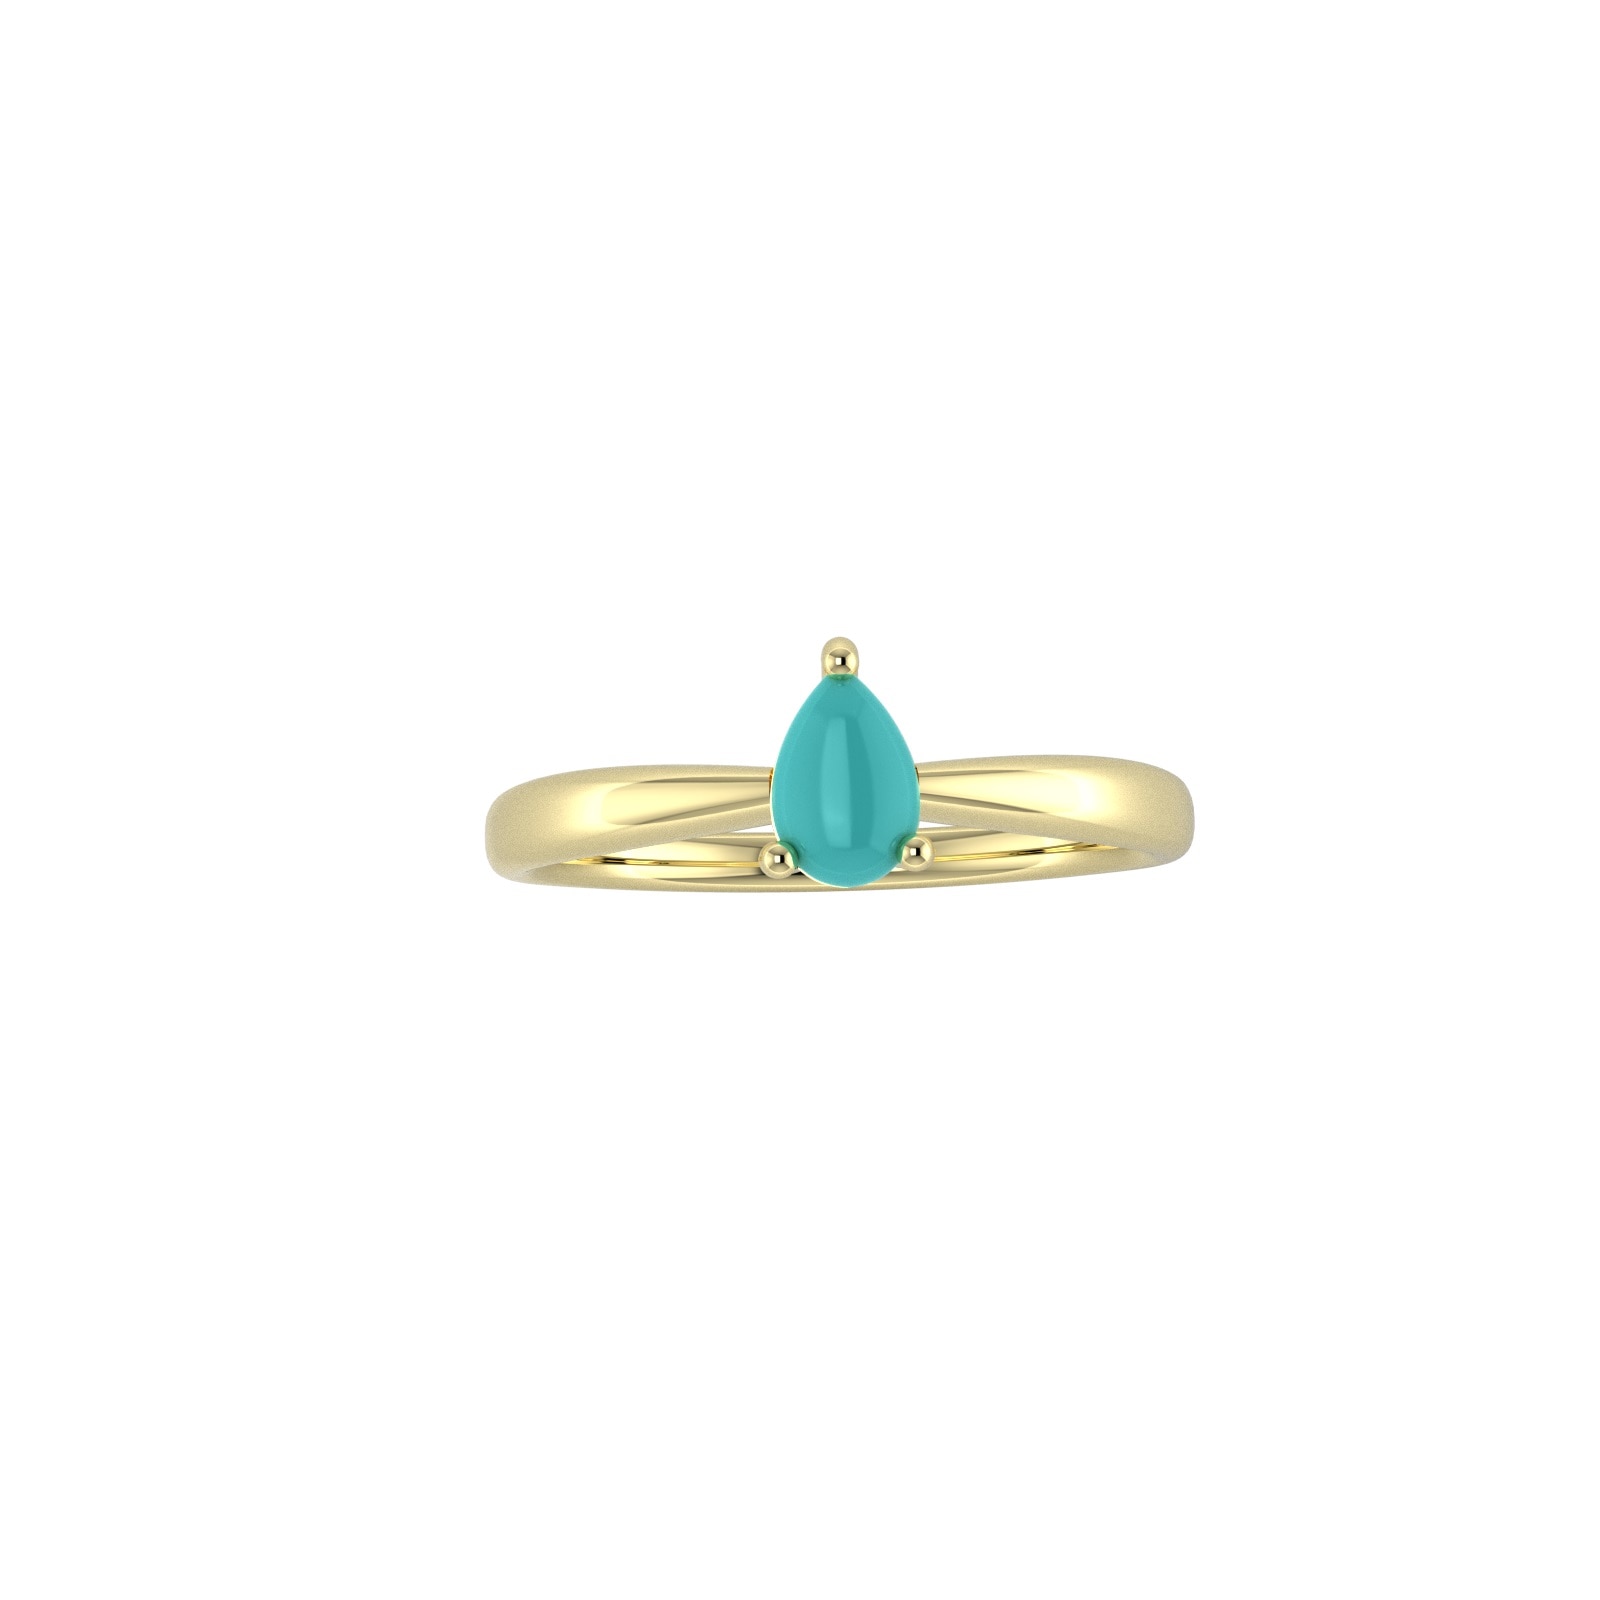 9ct Yellow Gold 4 Claw Pear Cut Turquoise Ring